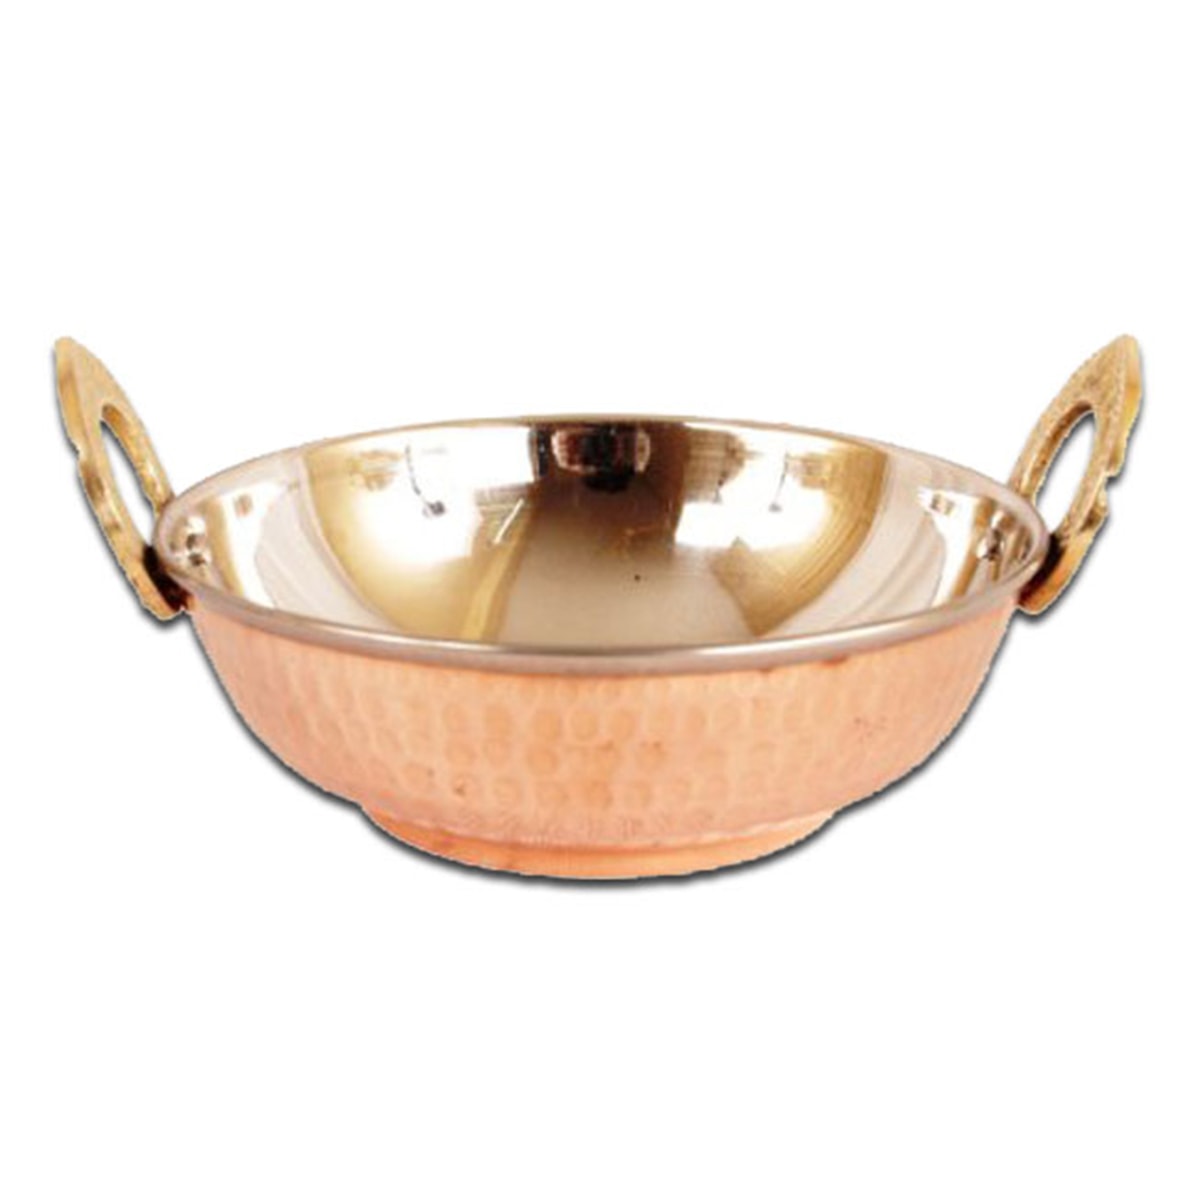 Buy IAG Products Copper and Steel Serving Wok (Kadai) with Handle - 235 gm